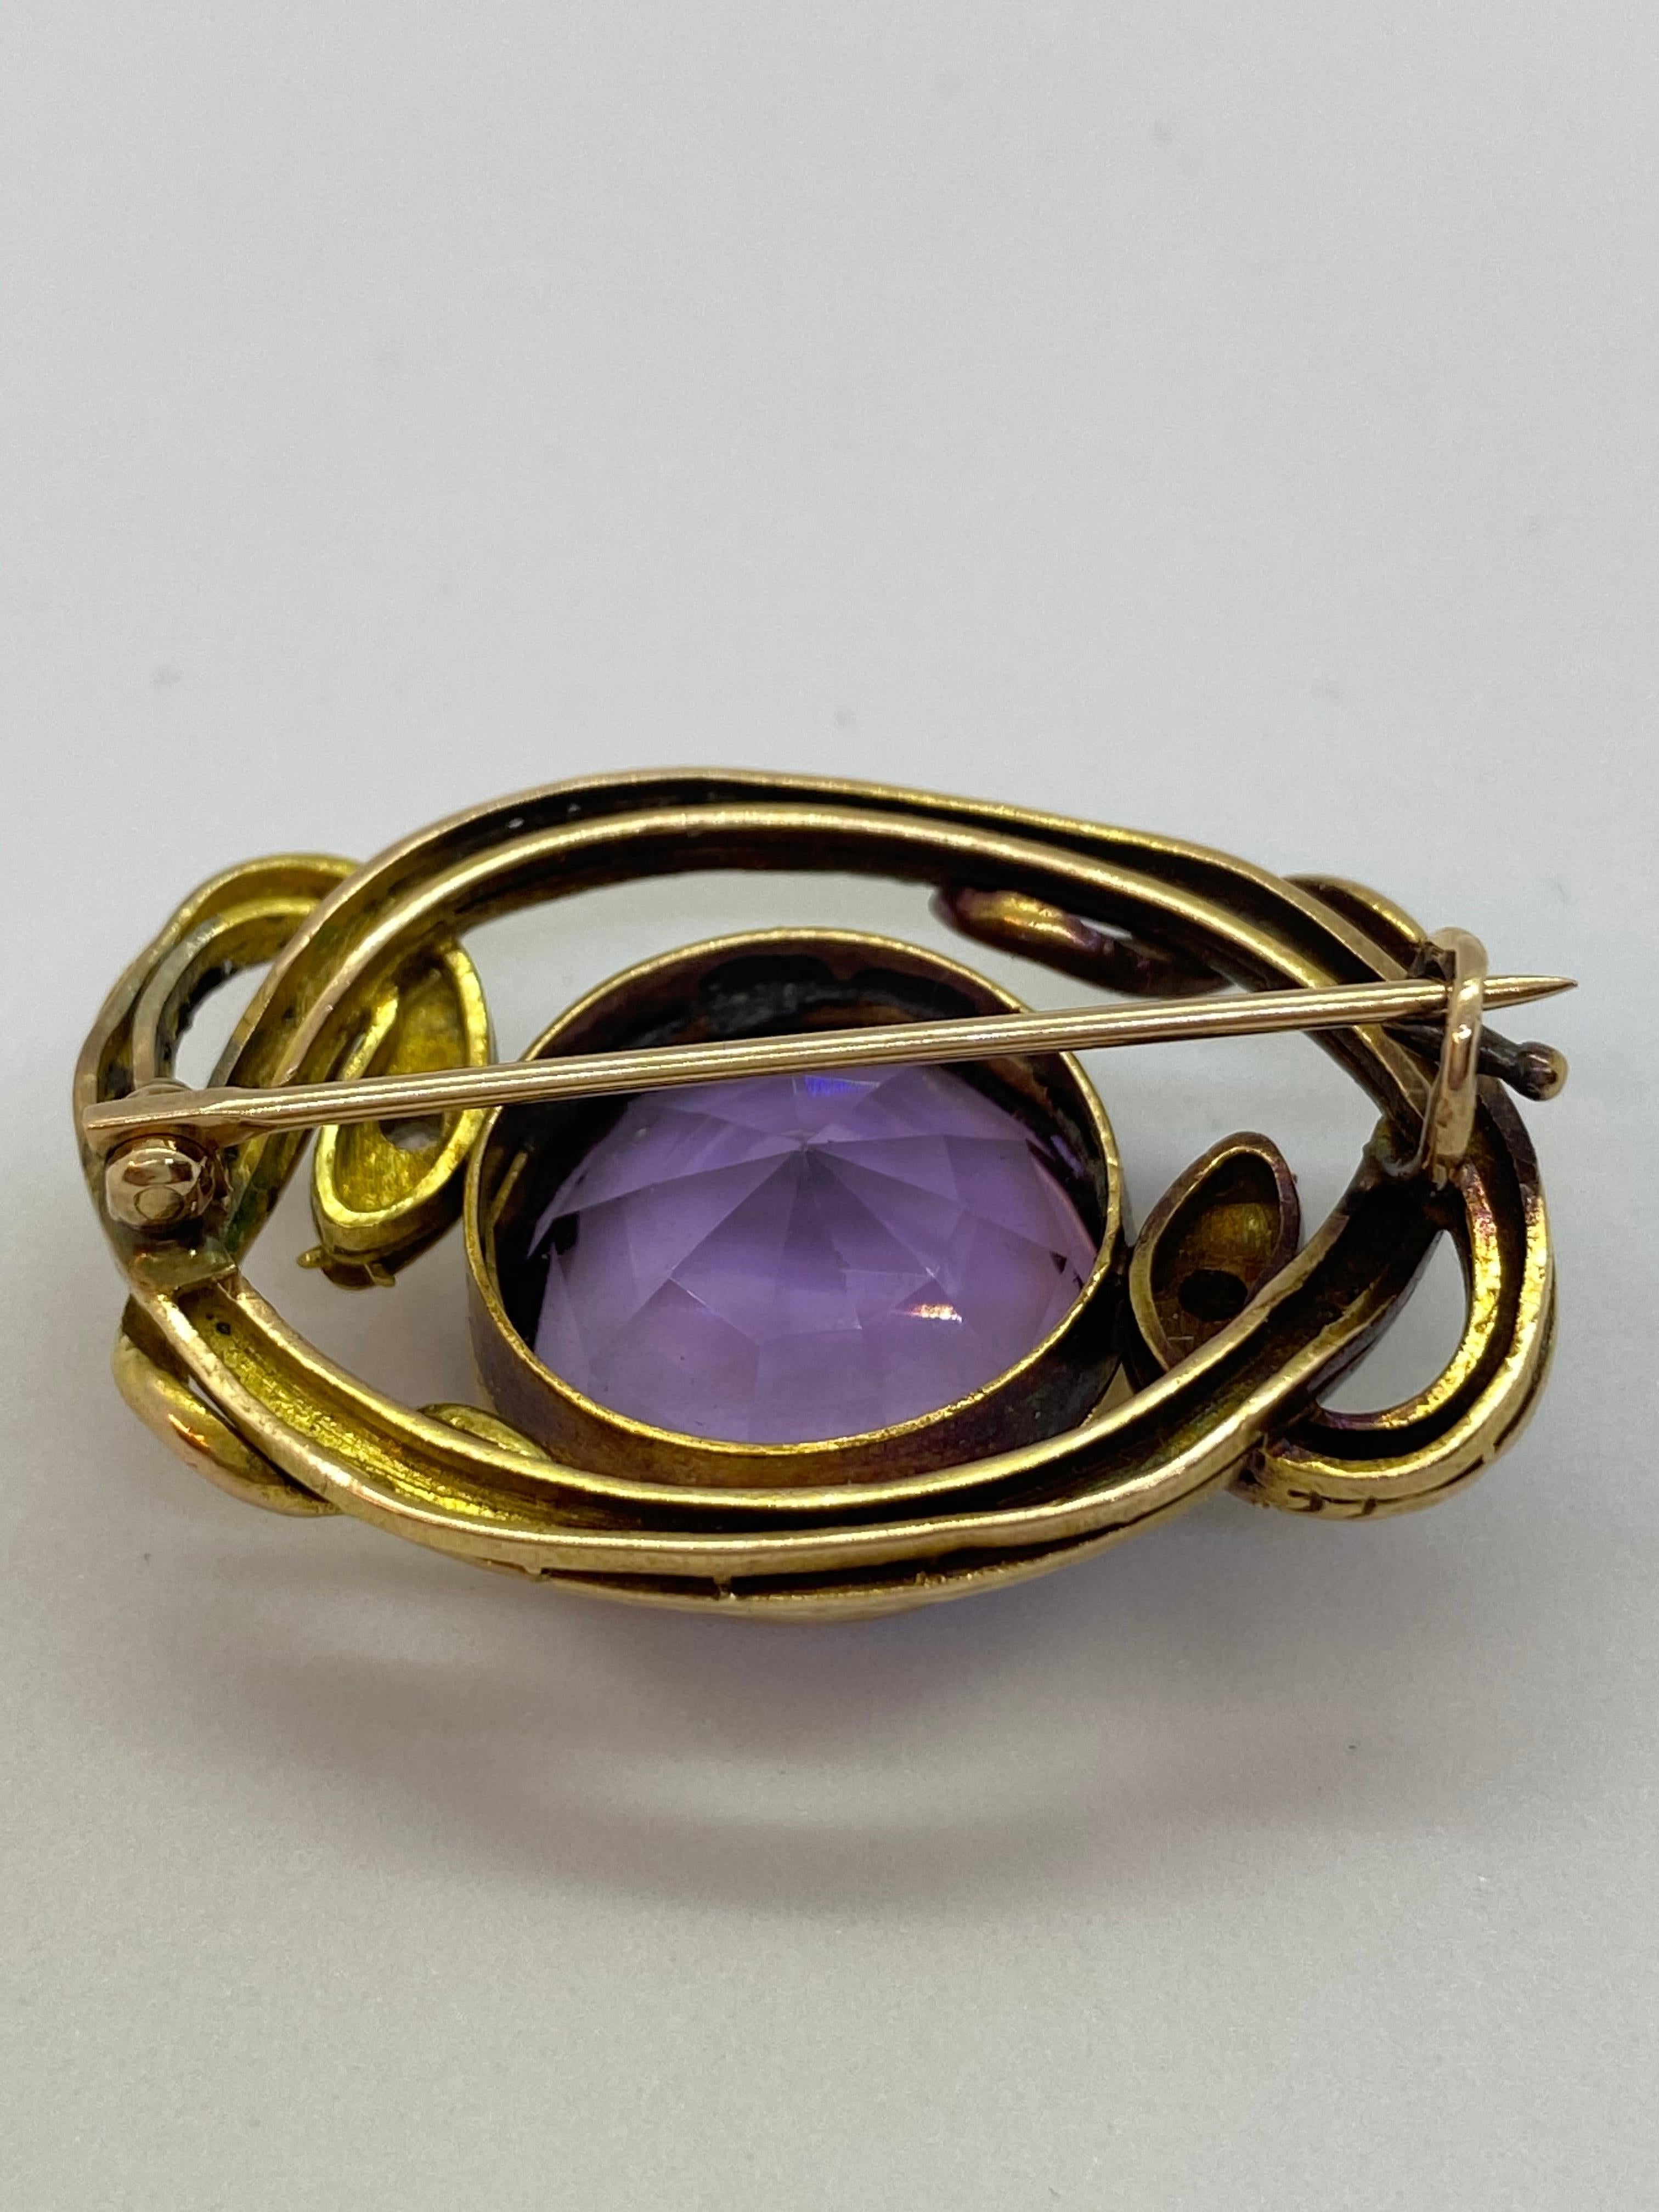 14 Carat Yellow Gold  Amethyst Diamond Russia Snake Brooch
14k gold, Saint Petersburg gold stamp 56
Amethyst, two small diamonds
Made in Russia before 1917